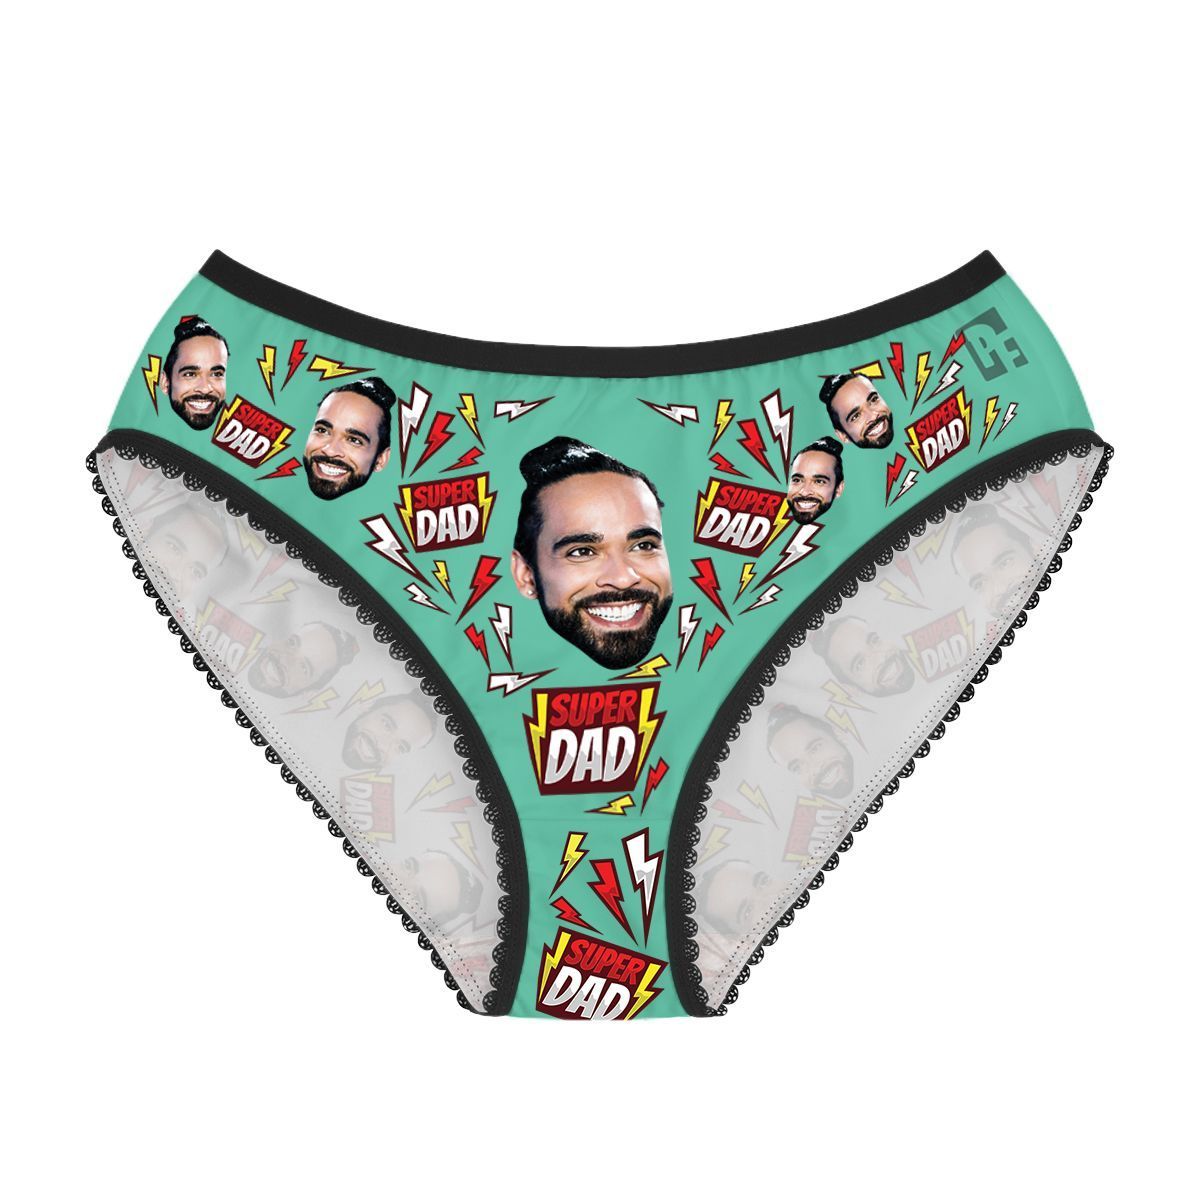 Mint Super dad women's underwear briefs personalized with photo printed on them